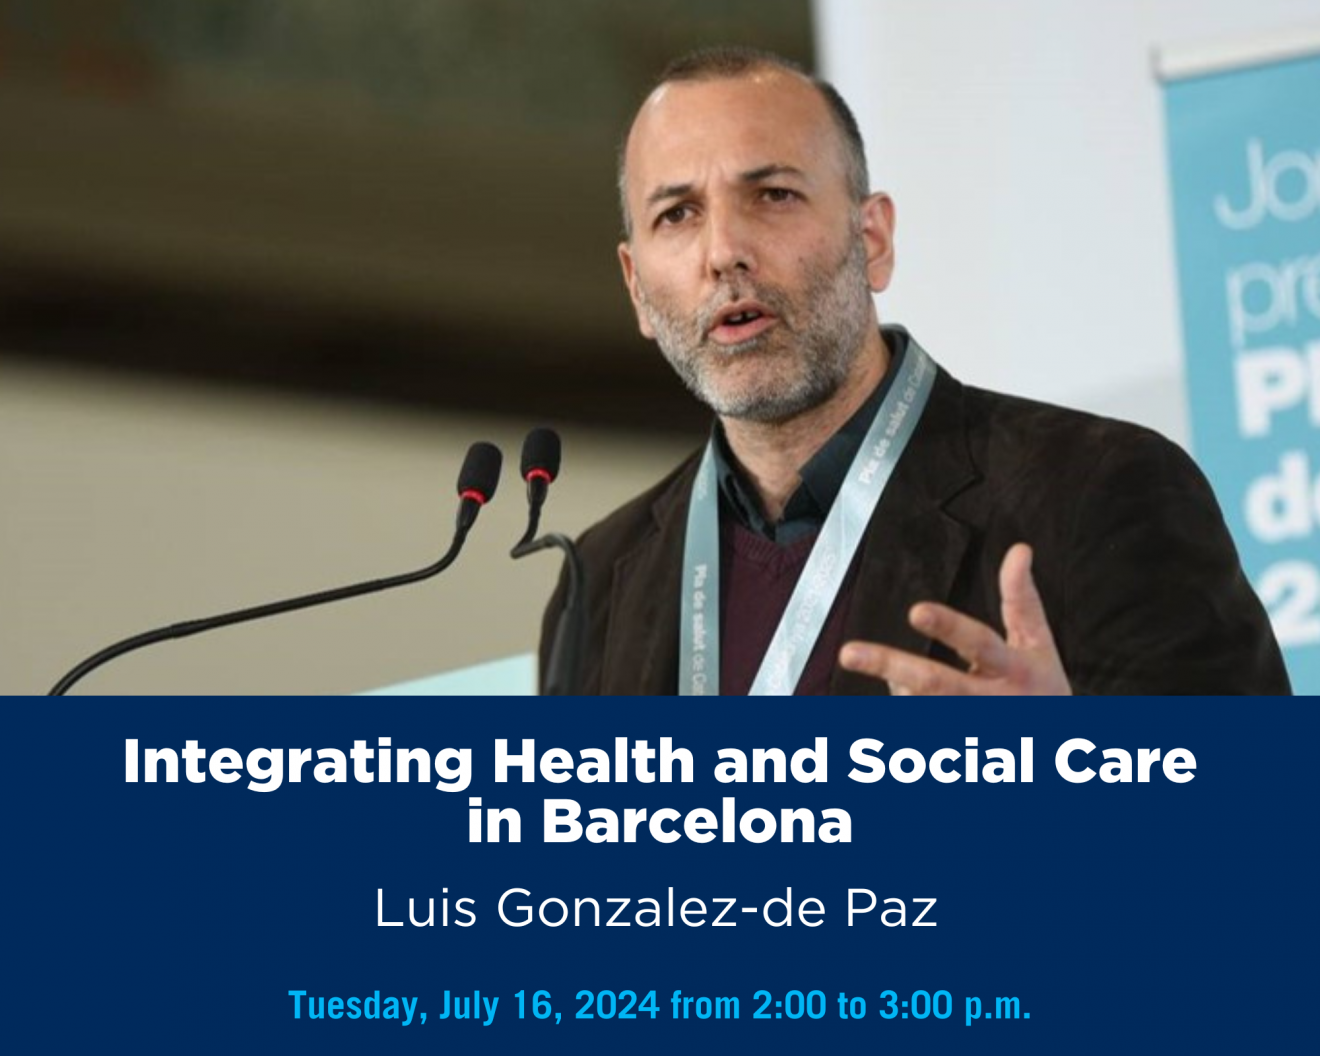 A person speaking at a podium with text that says 'Integrating Health and Social Care in Barcelona Luis Gonzalez-de Paz Tuesday, July 16, 2024 from 2:00 to 3:00 p.m.'